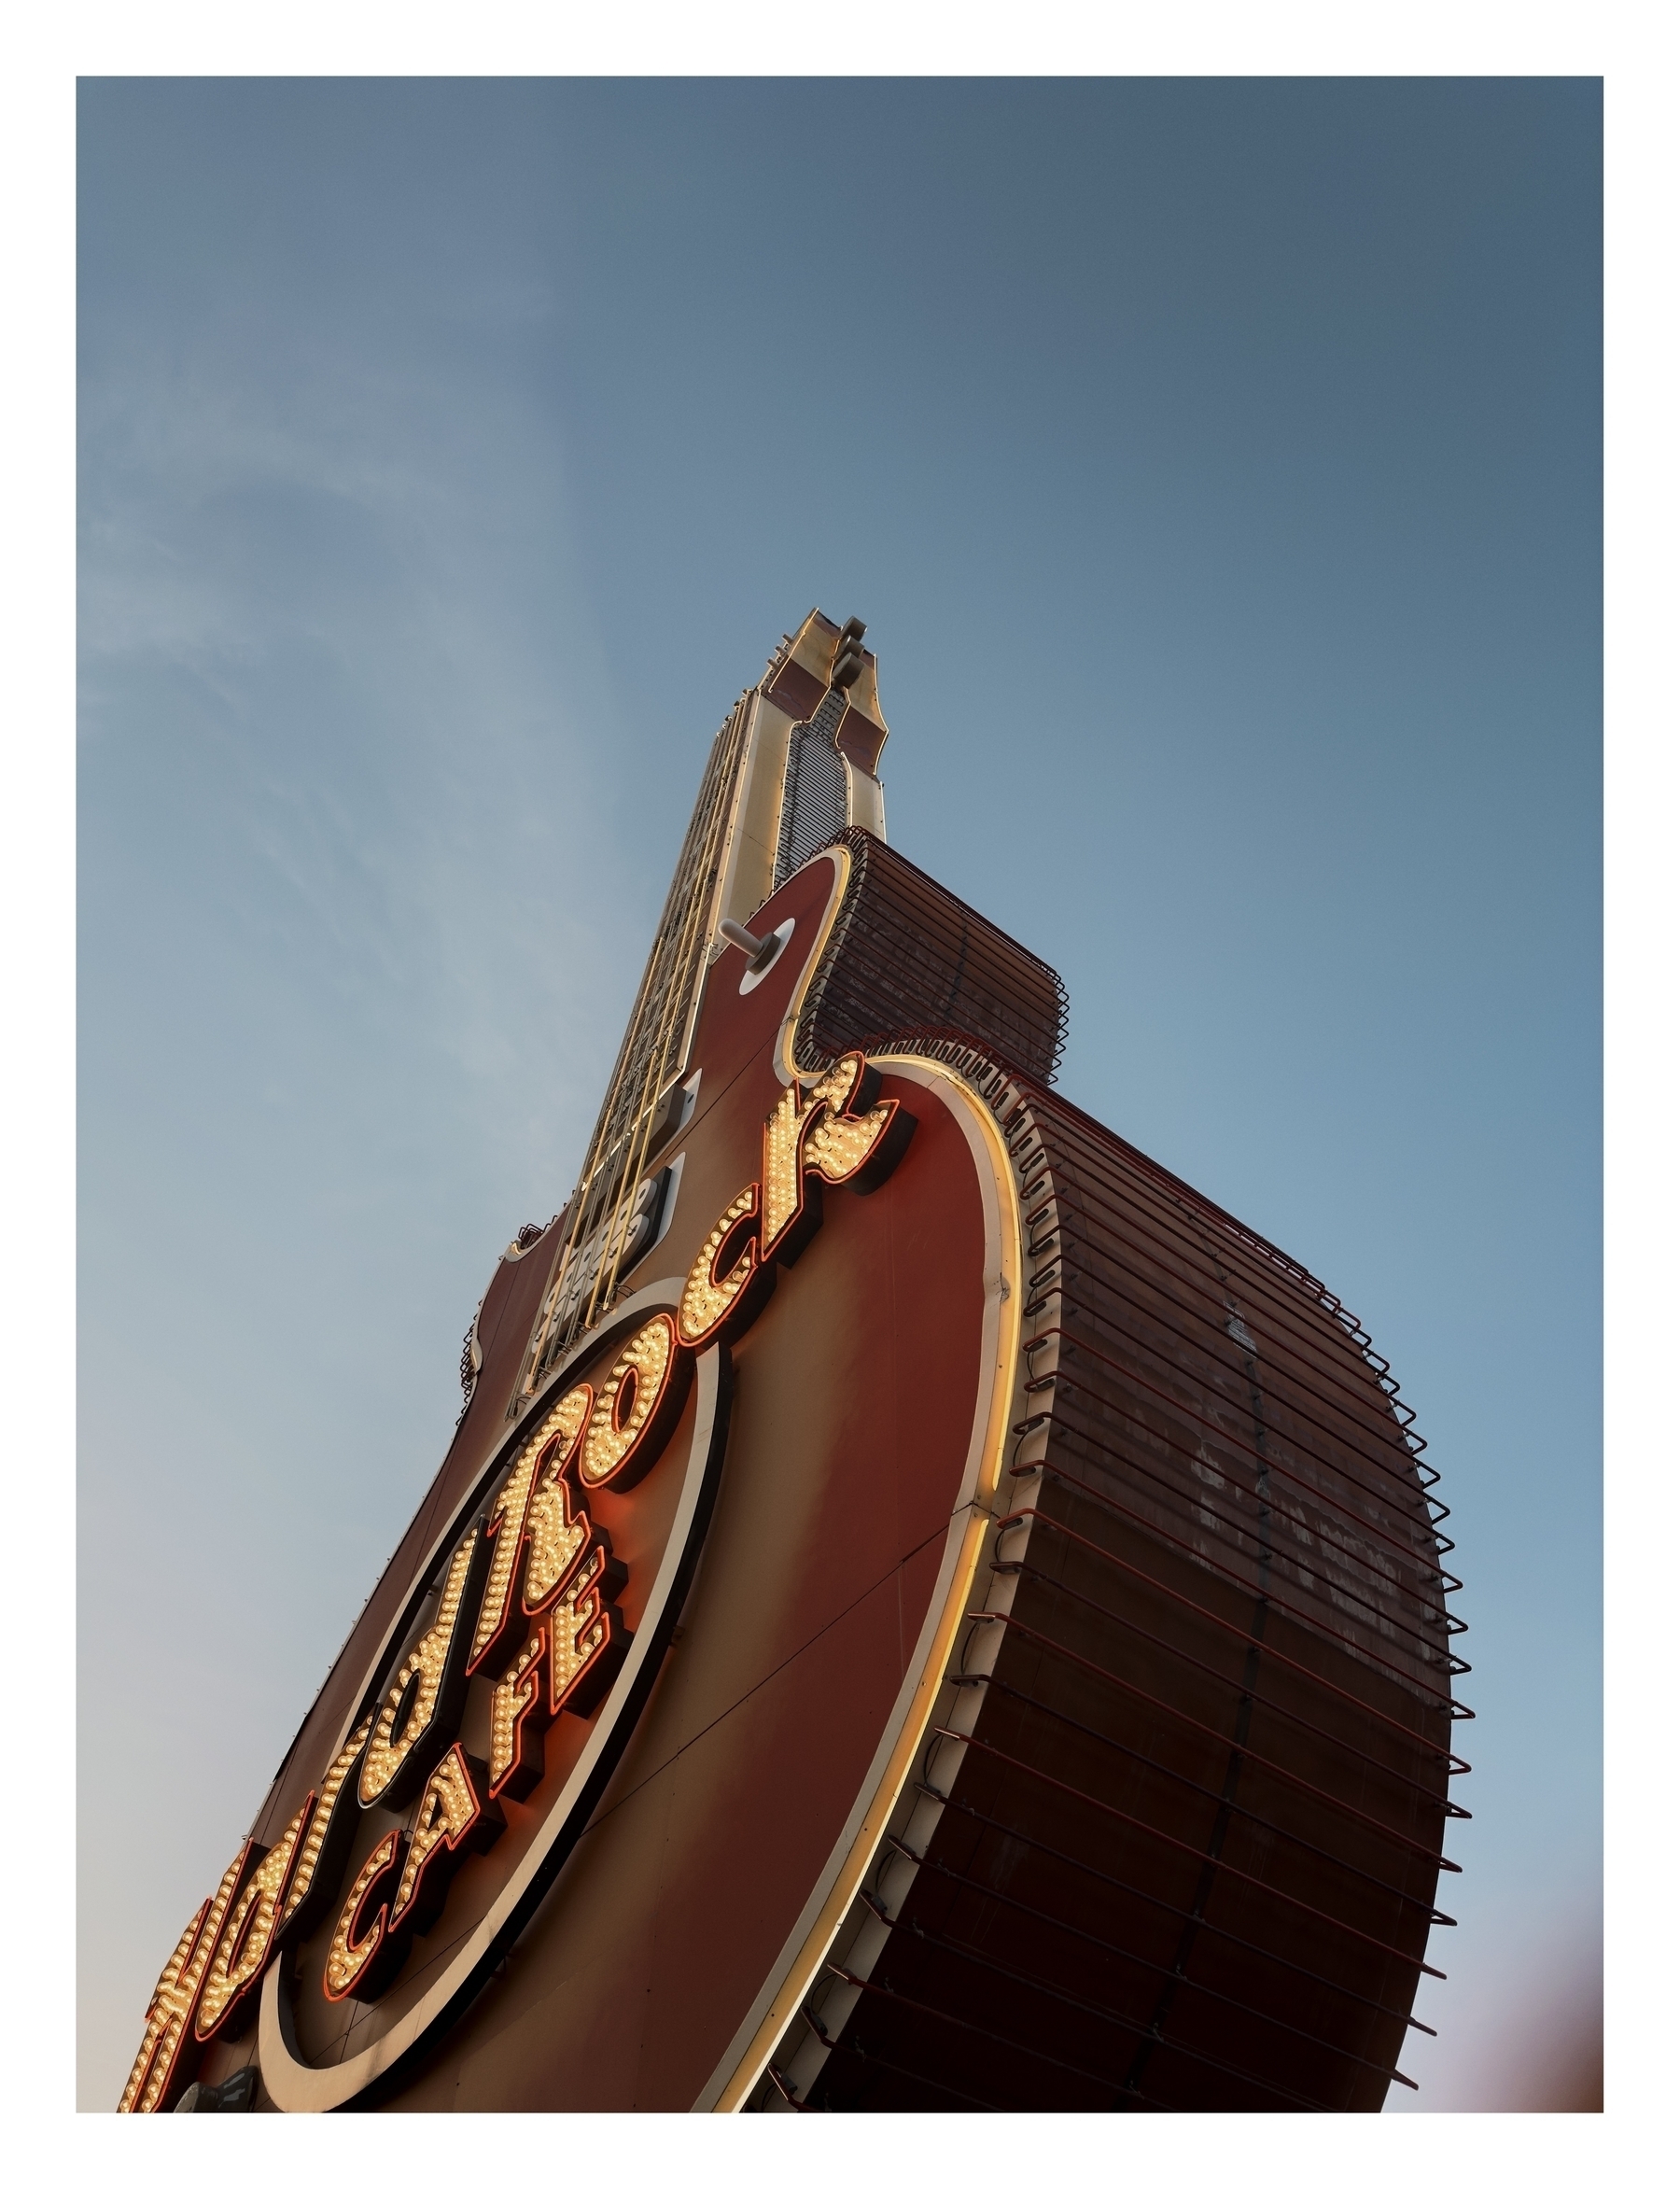 A towering, illuminated sign reads “Hard Rock Cafe,” set against a clear sky at twilight.